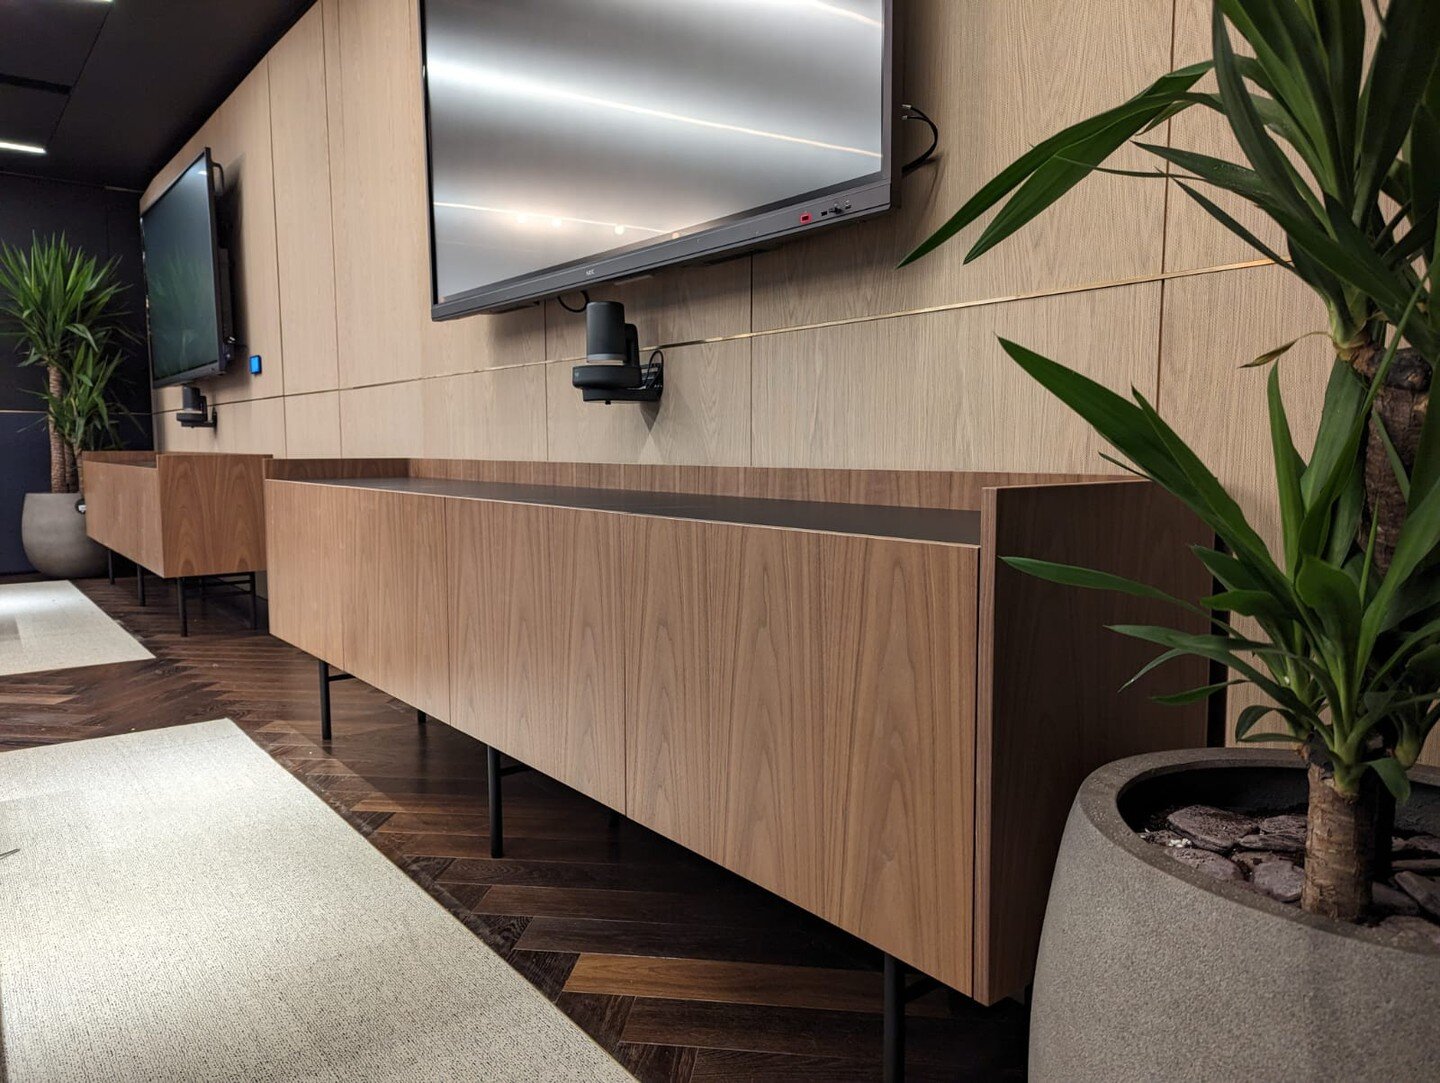 We love these walnut credenzas we produced for Maven Securities with @umbrellafurniture and @perkinswill_lon . An amazing project which we're proud to be a part of. 

Swipe right to see our giant 3 x 1.5m flip top tables too!
.
.
.
#furniture #furnit